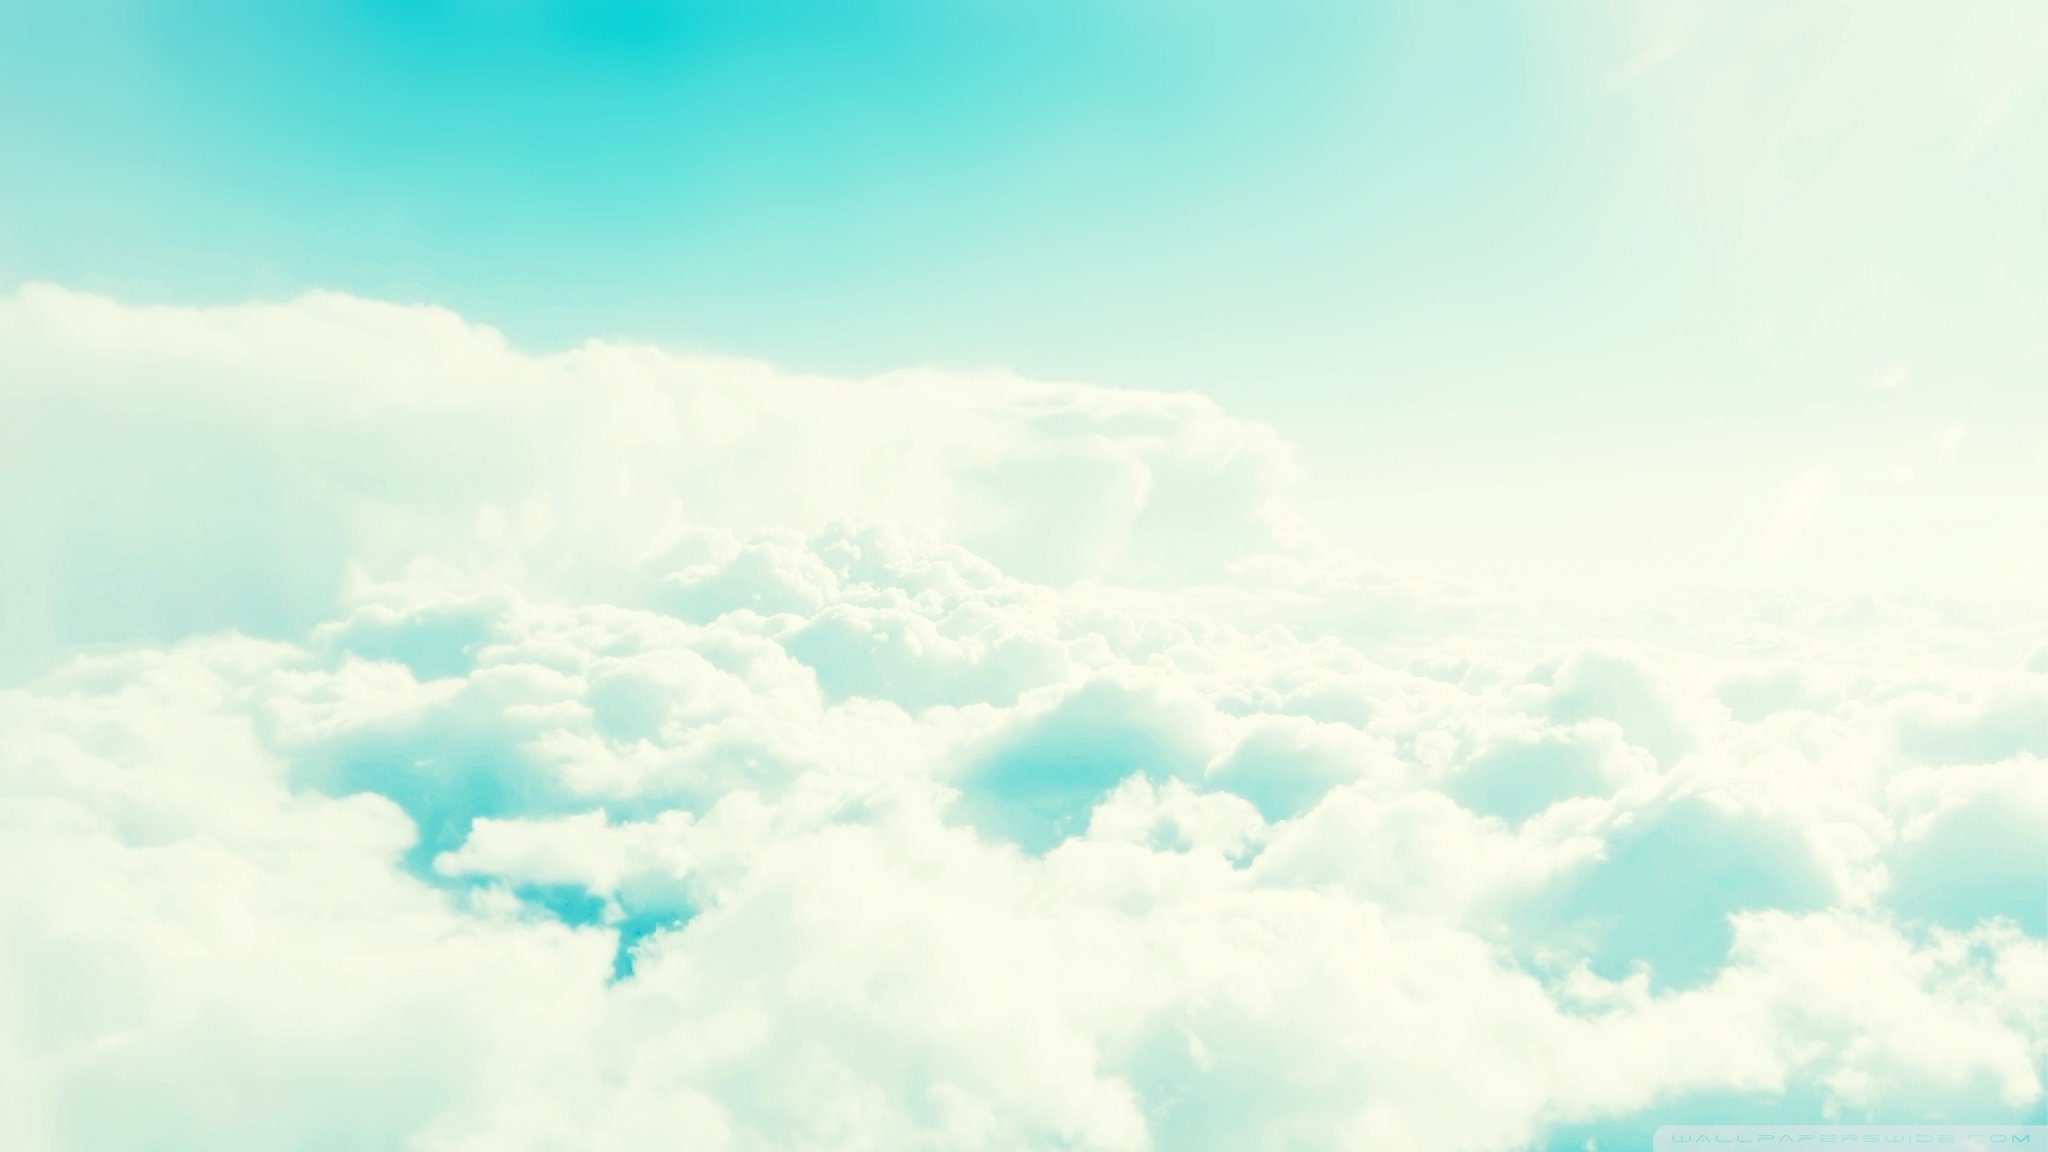 Free Download The Sky Is Awake 2048x1152 For Your Desktop Mobile Tablet Explore 47 Cute 2048 By 1152 Wallpaper 2048 By 1152 Wallpapers Youtube 2048 By 1152 Wallpaper Creator Space Wallpaper 2048 By 1152